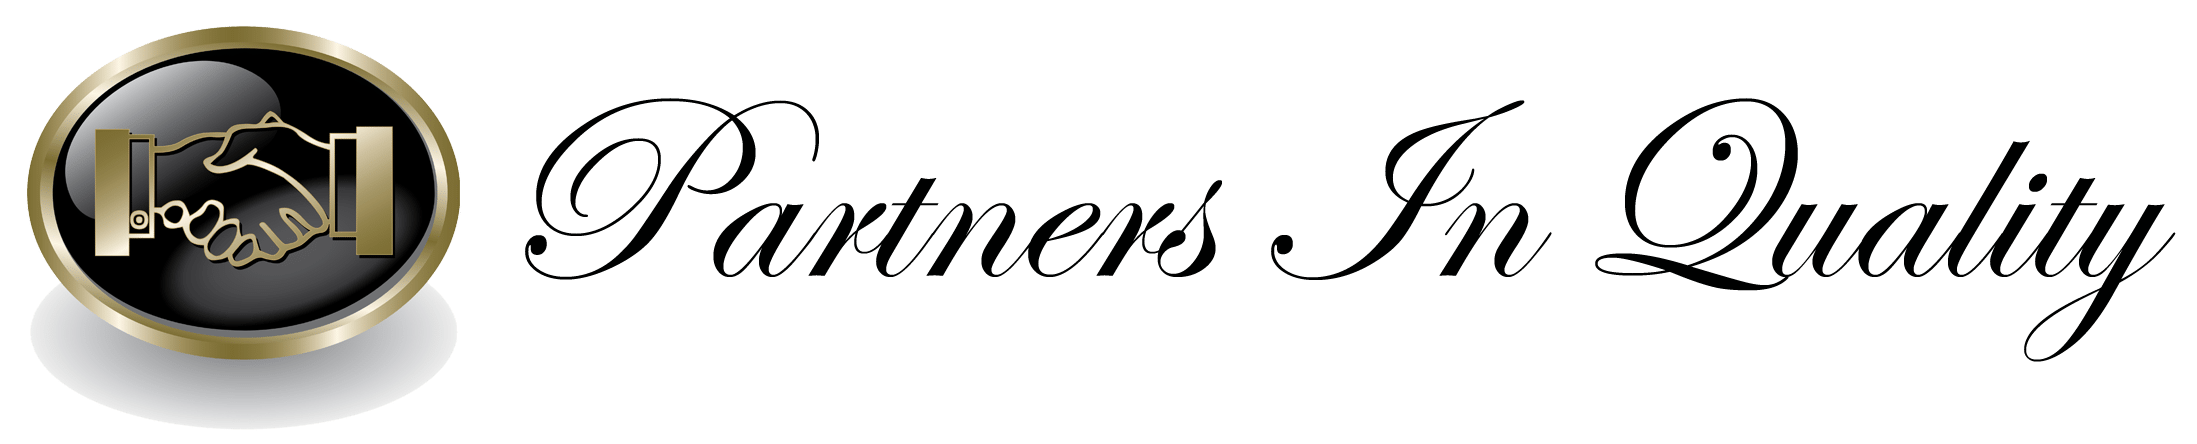 Partners in Quality